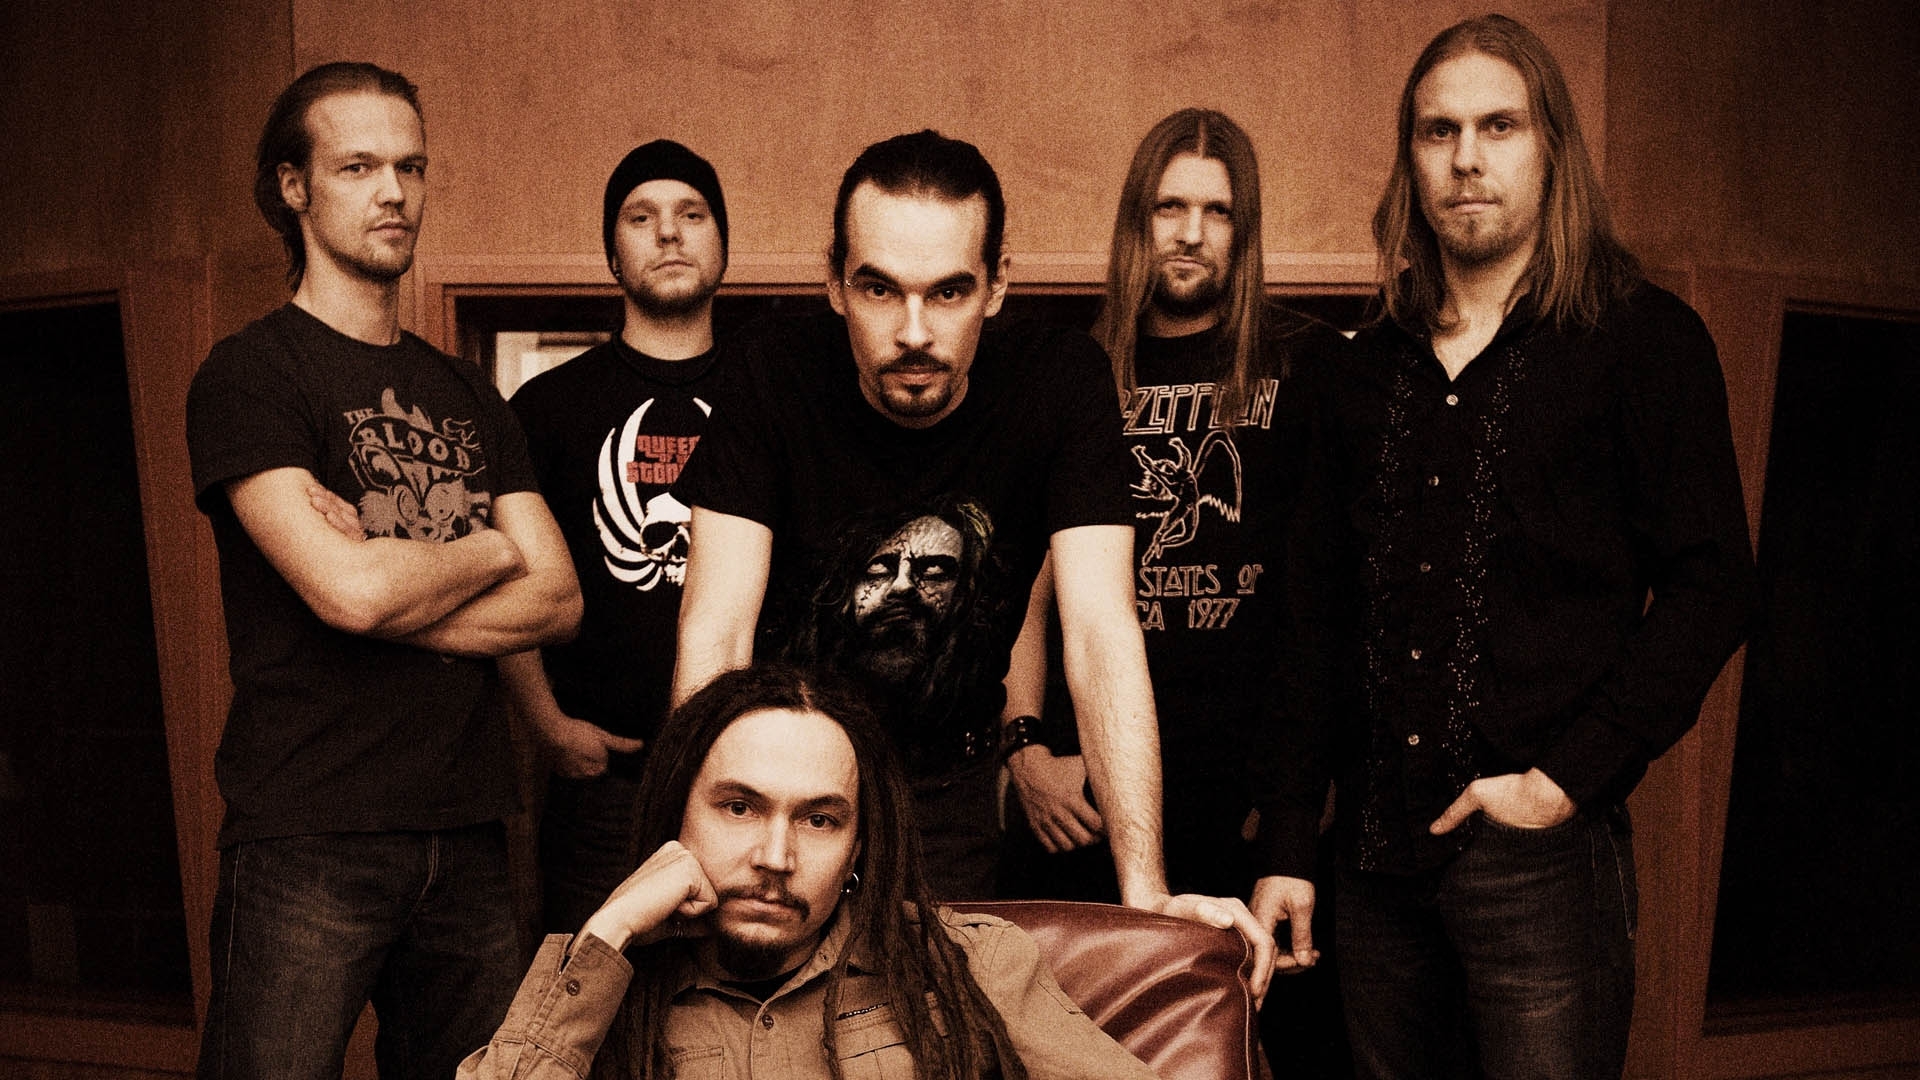 Download background music, amorphis